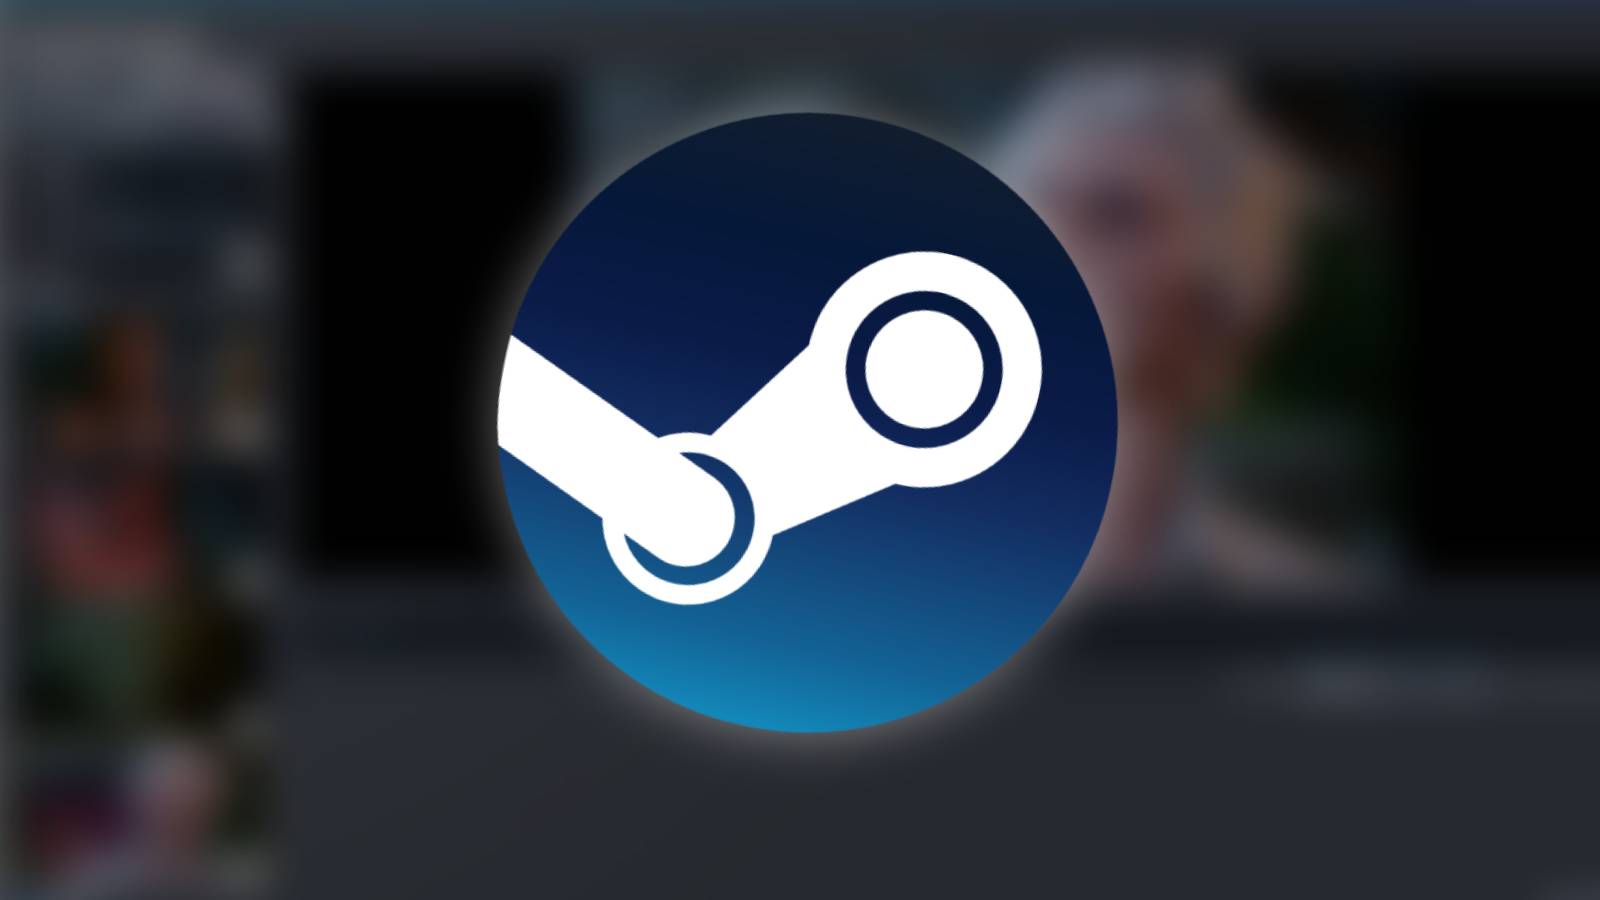 Image of the Steam logo on a blurred screenshot of the Steam Screenshot Manager.